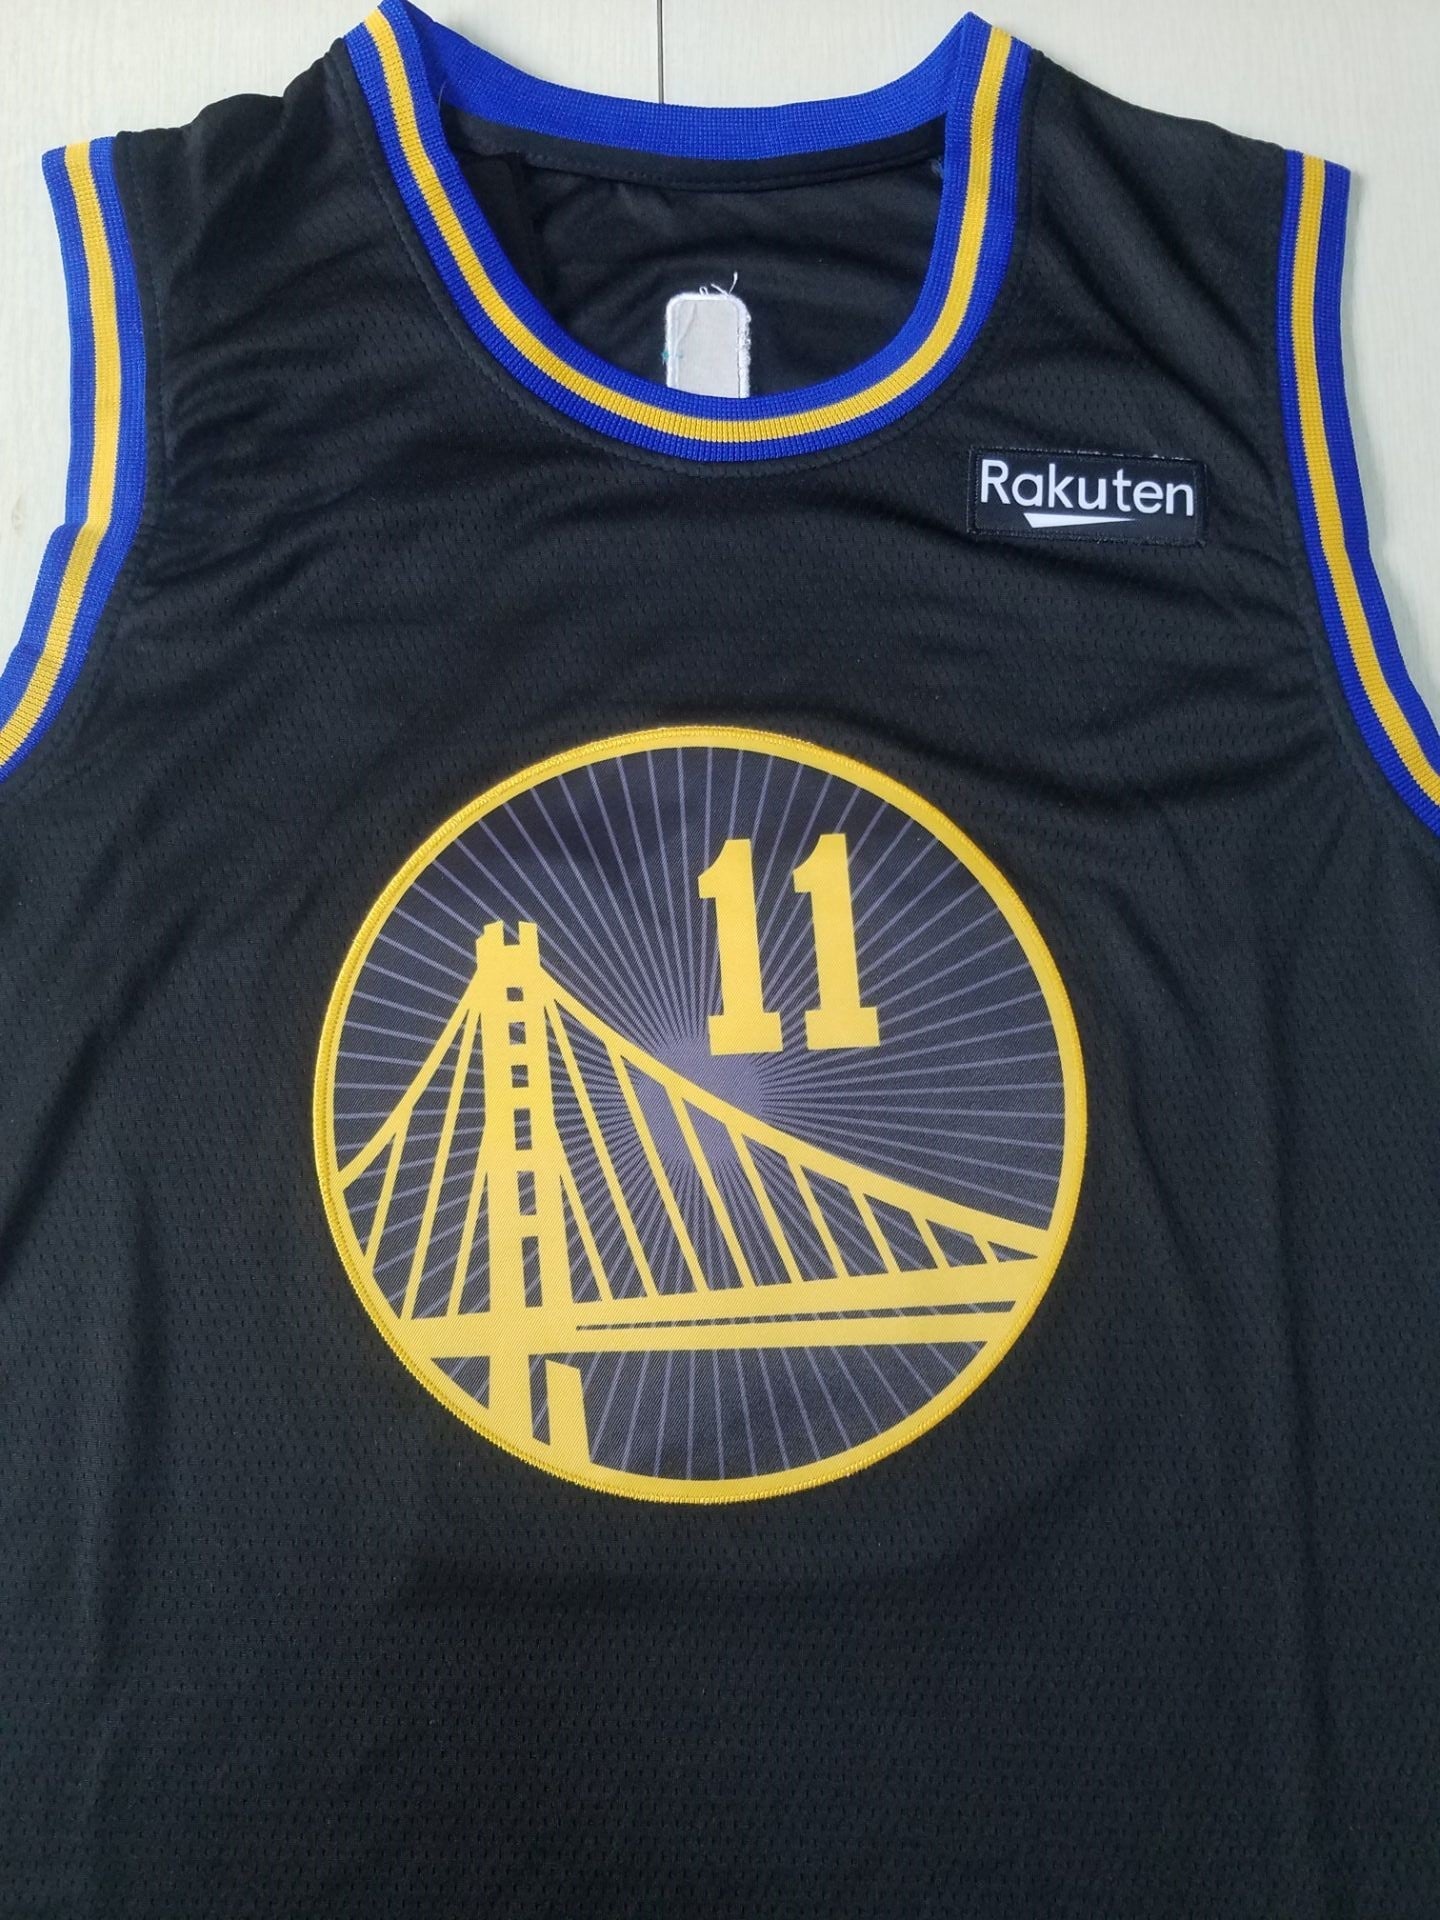 Men's Golden State Warriors Klay Thompson #11 City Edition Black Classic Jersey